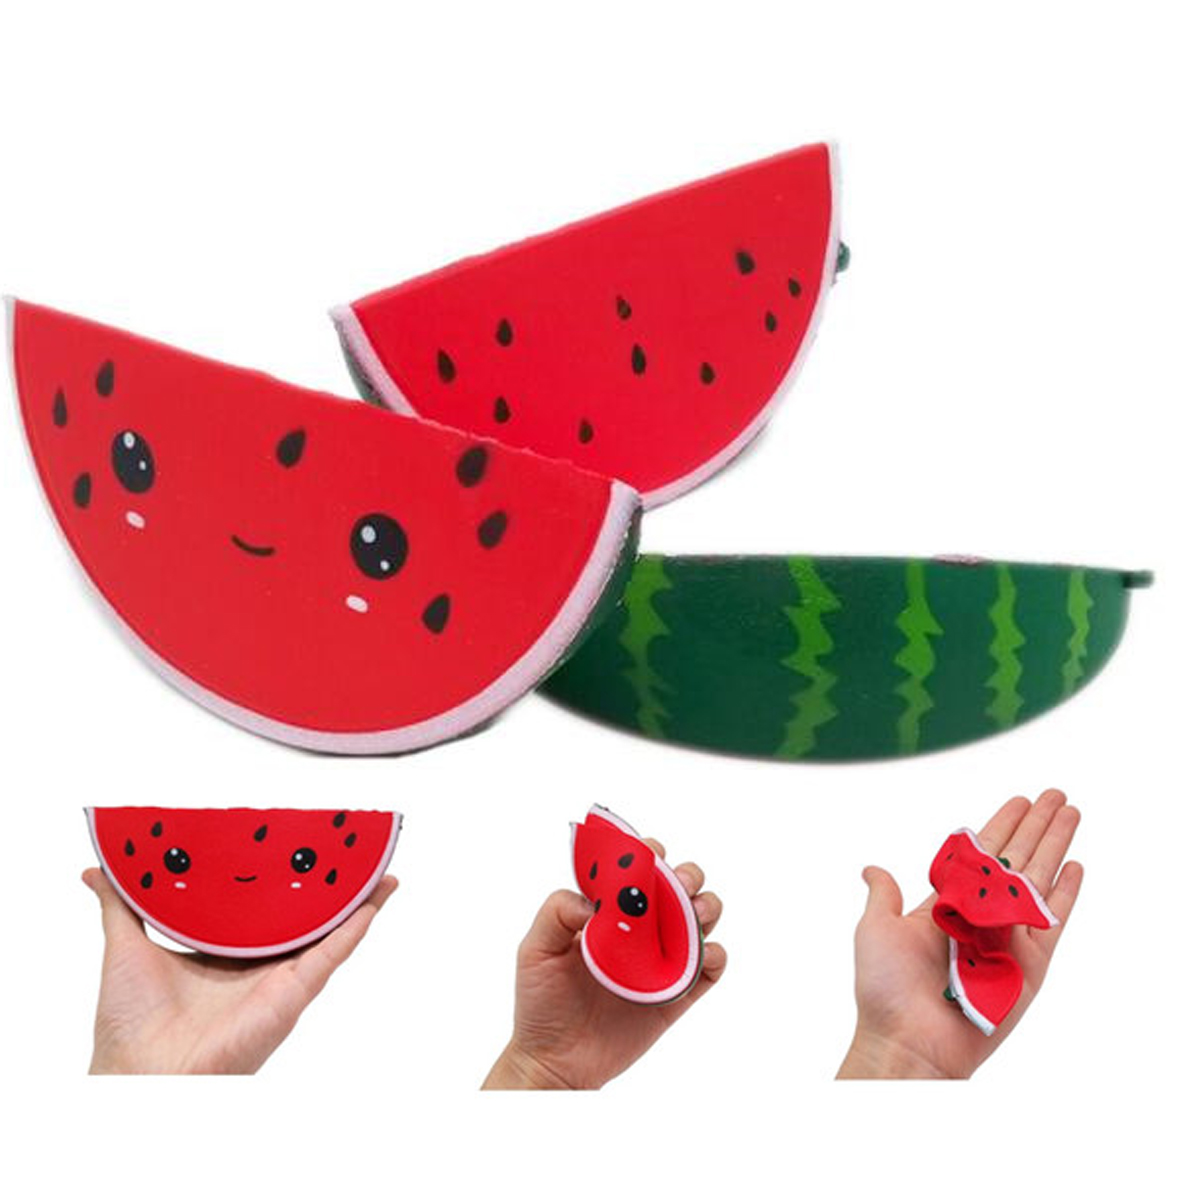 GL-ELY1207 Watermelon Shaped Release Stress Reliever